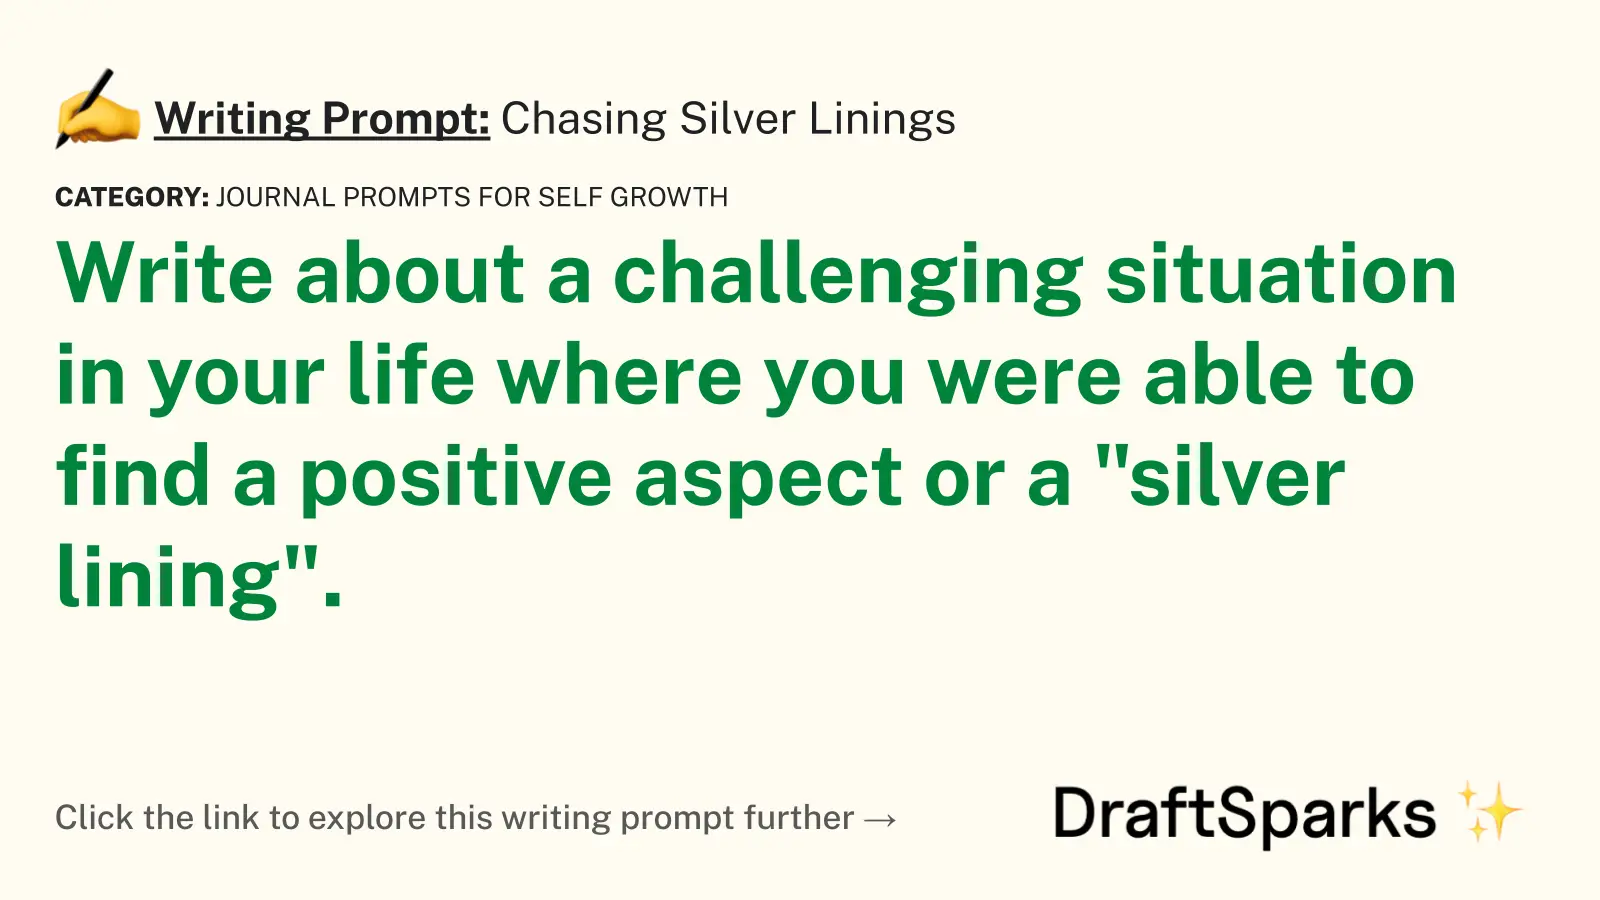 Chasing Silver Linings